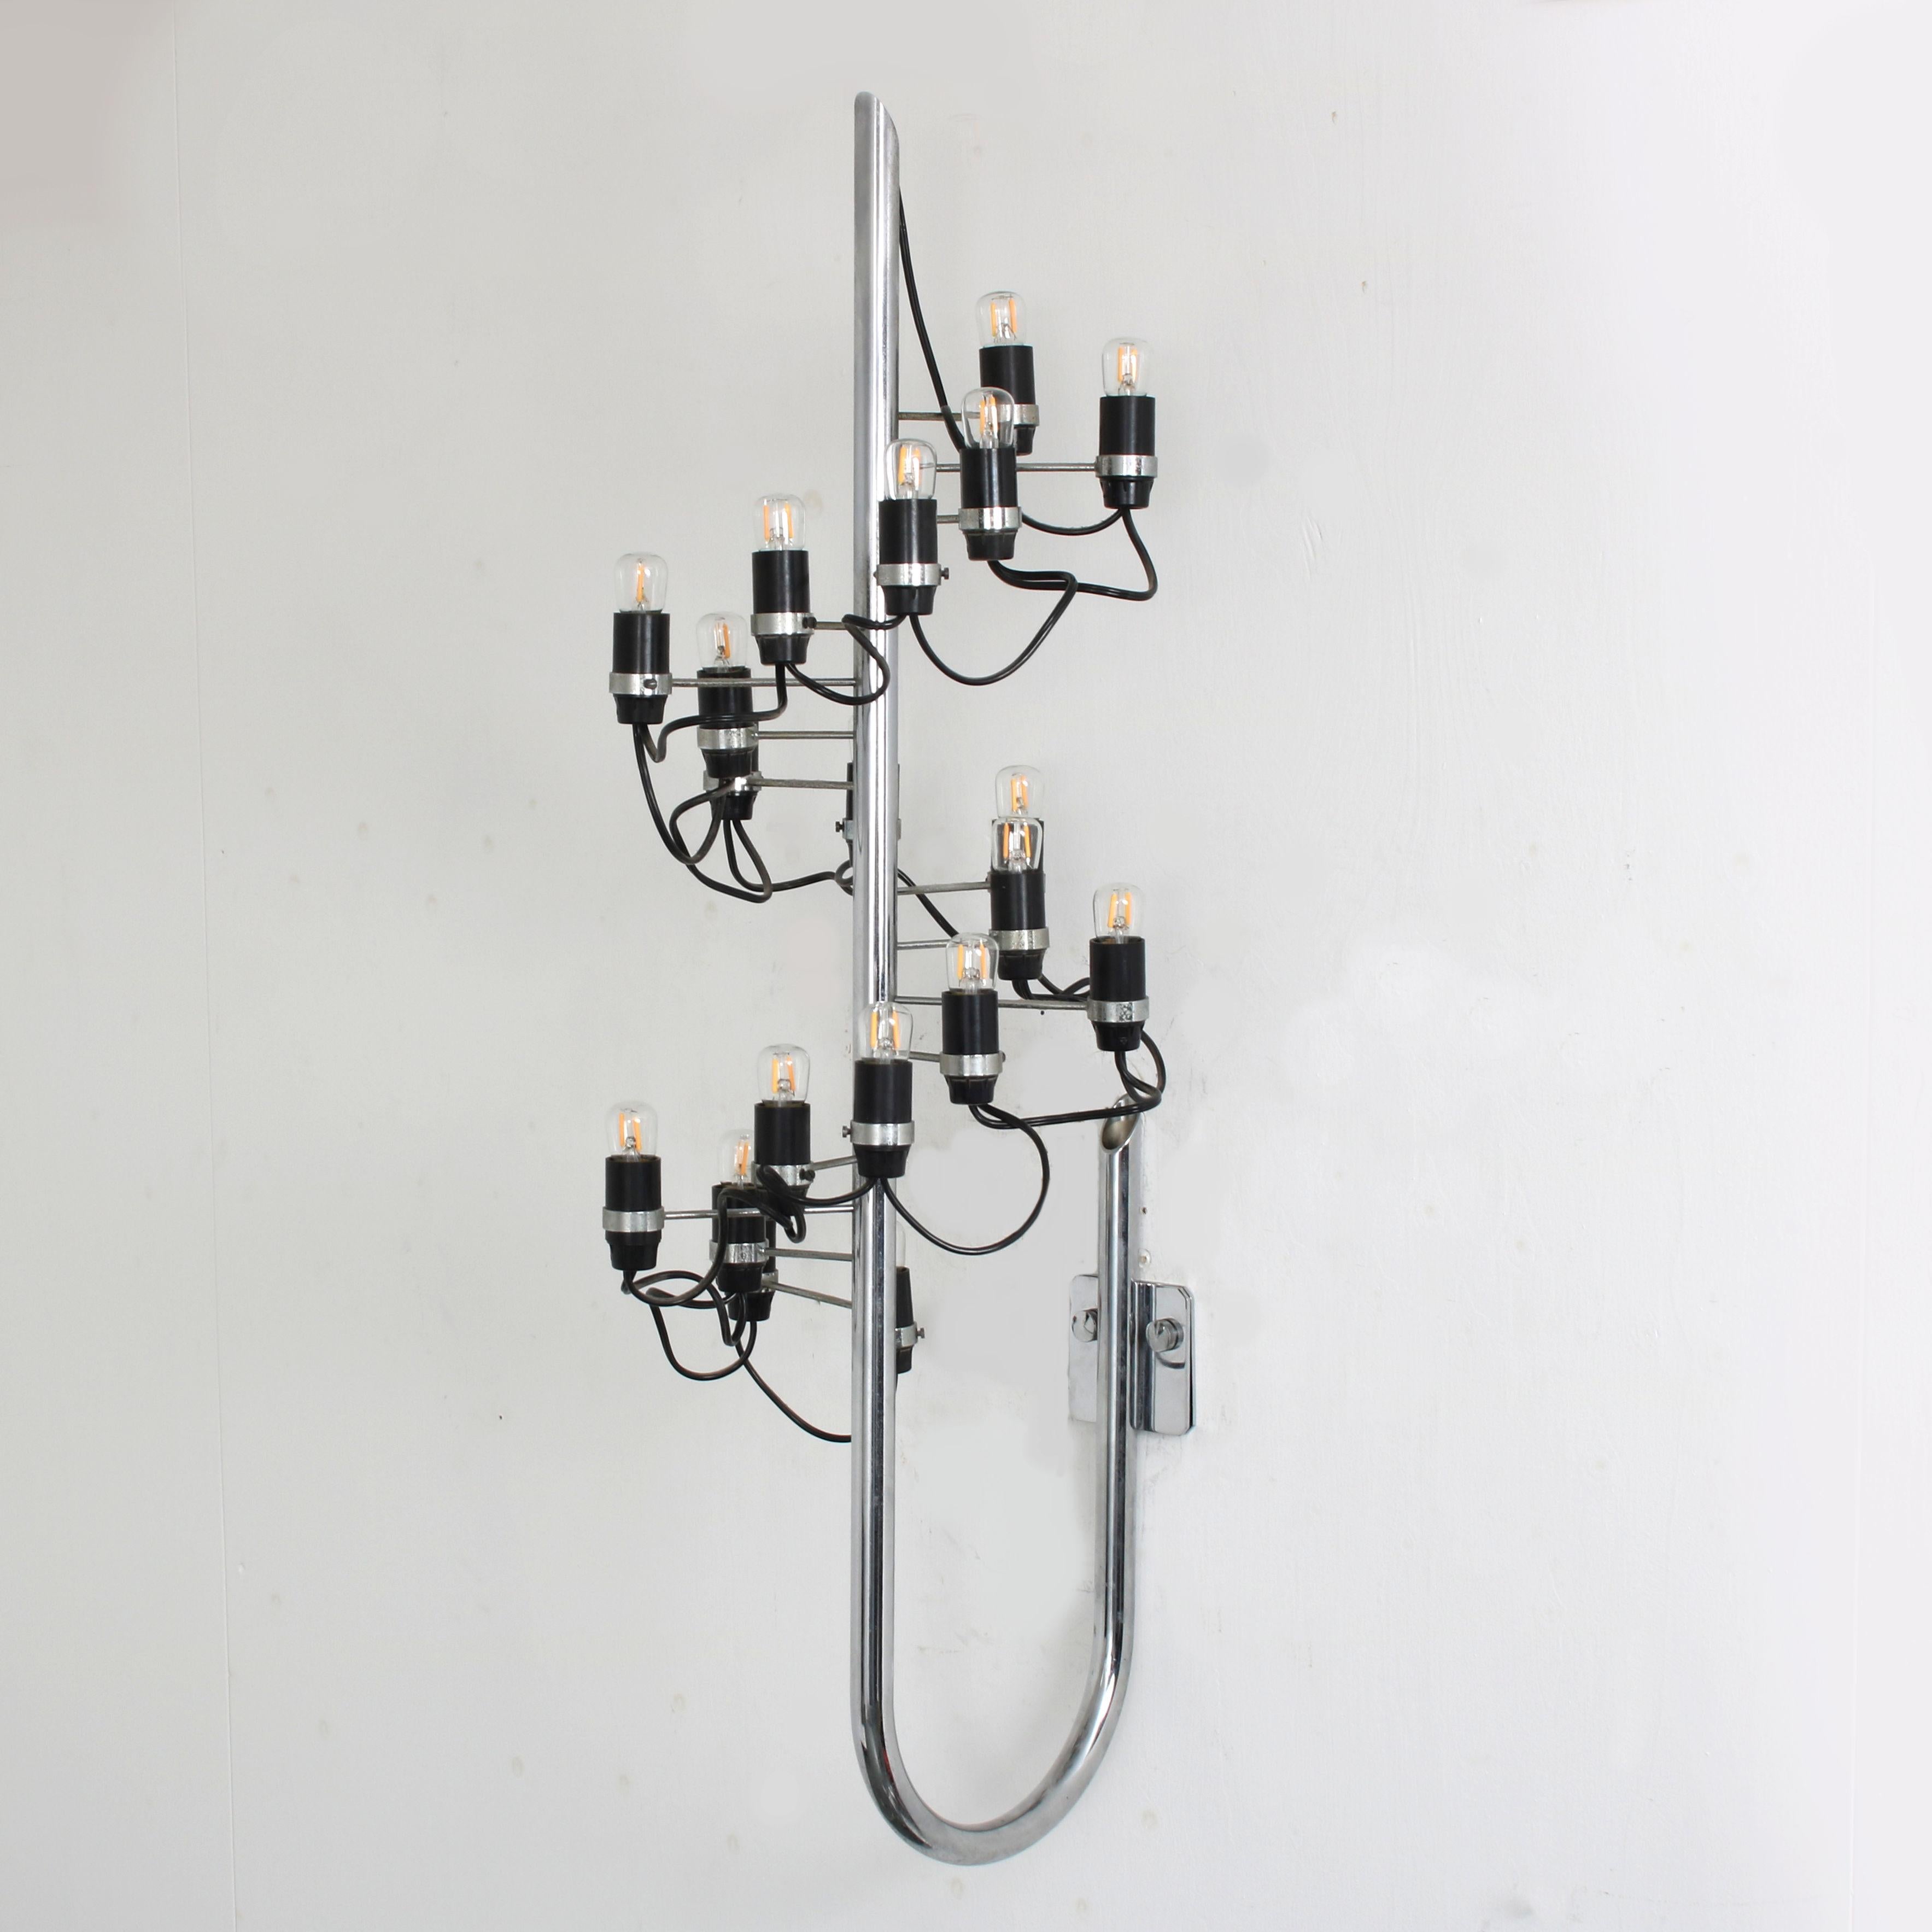 Gino Sarfatti “226” Wall Lamp for Flos Italy, 1970 In Good Condition For Sale In Amsterdam, NL